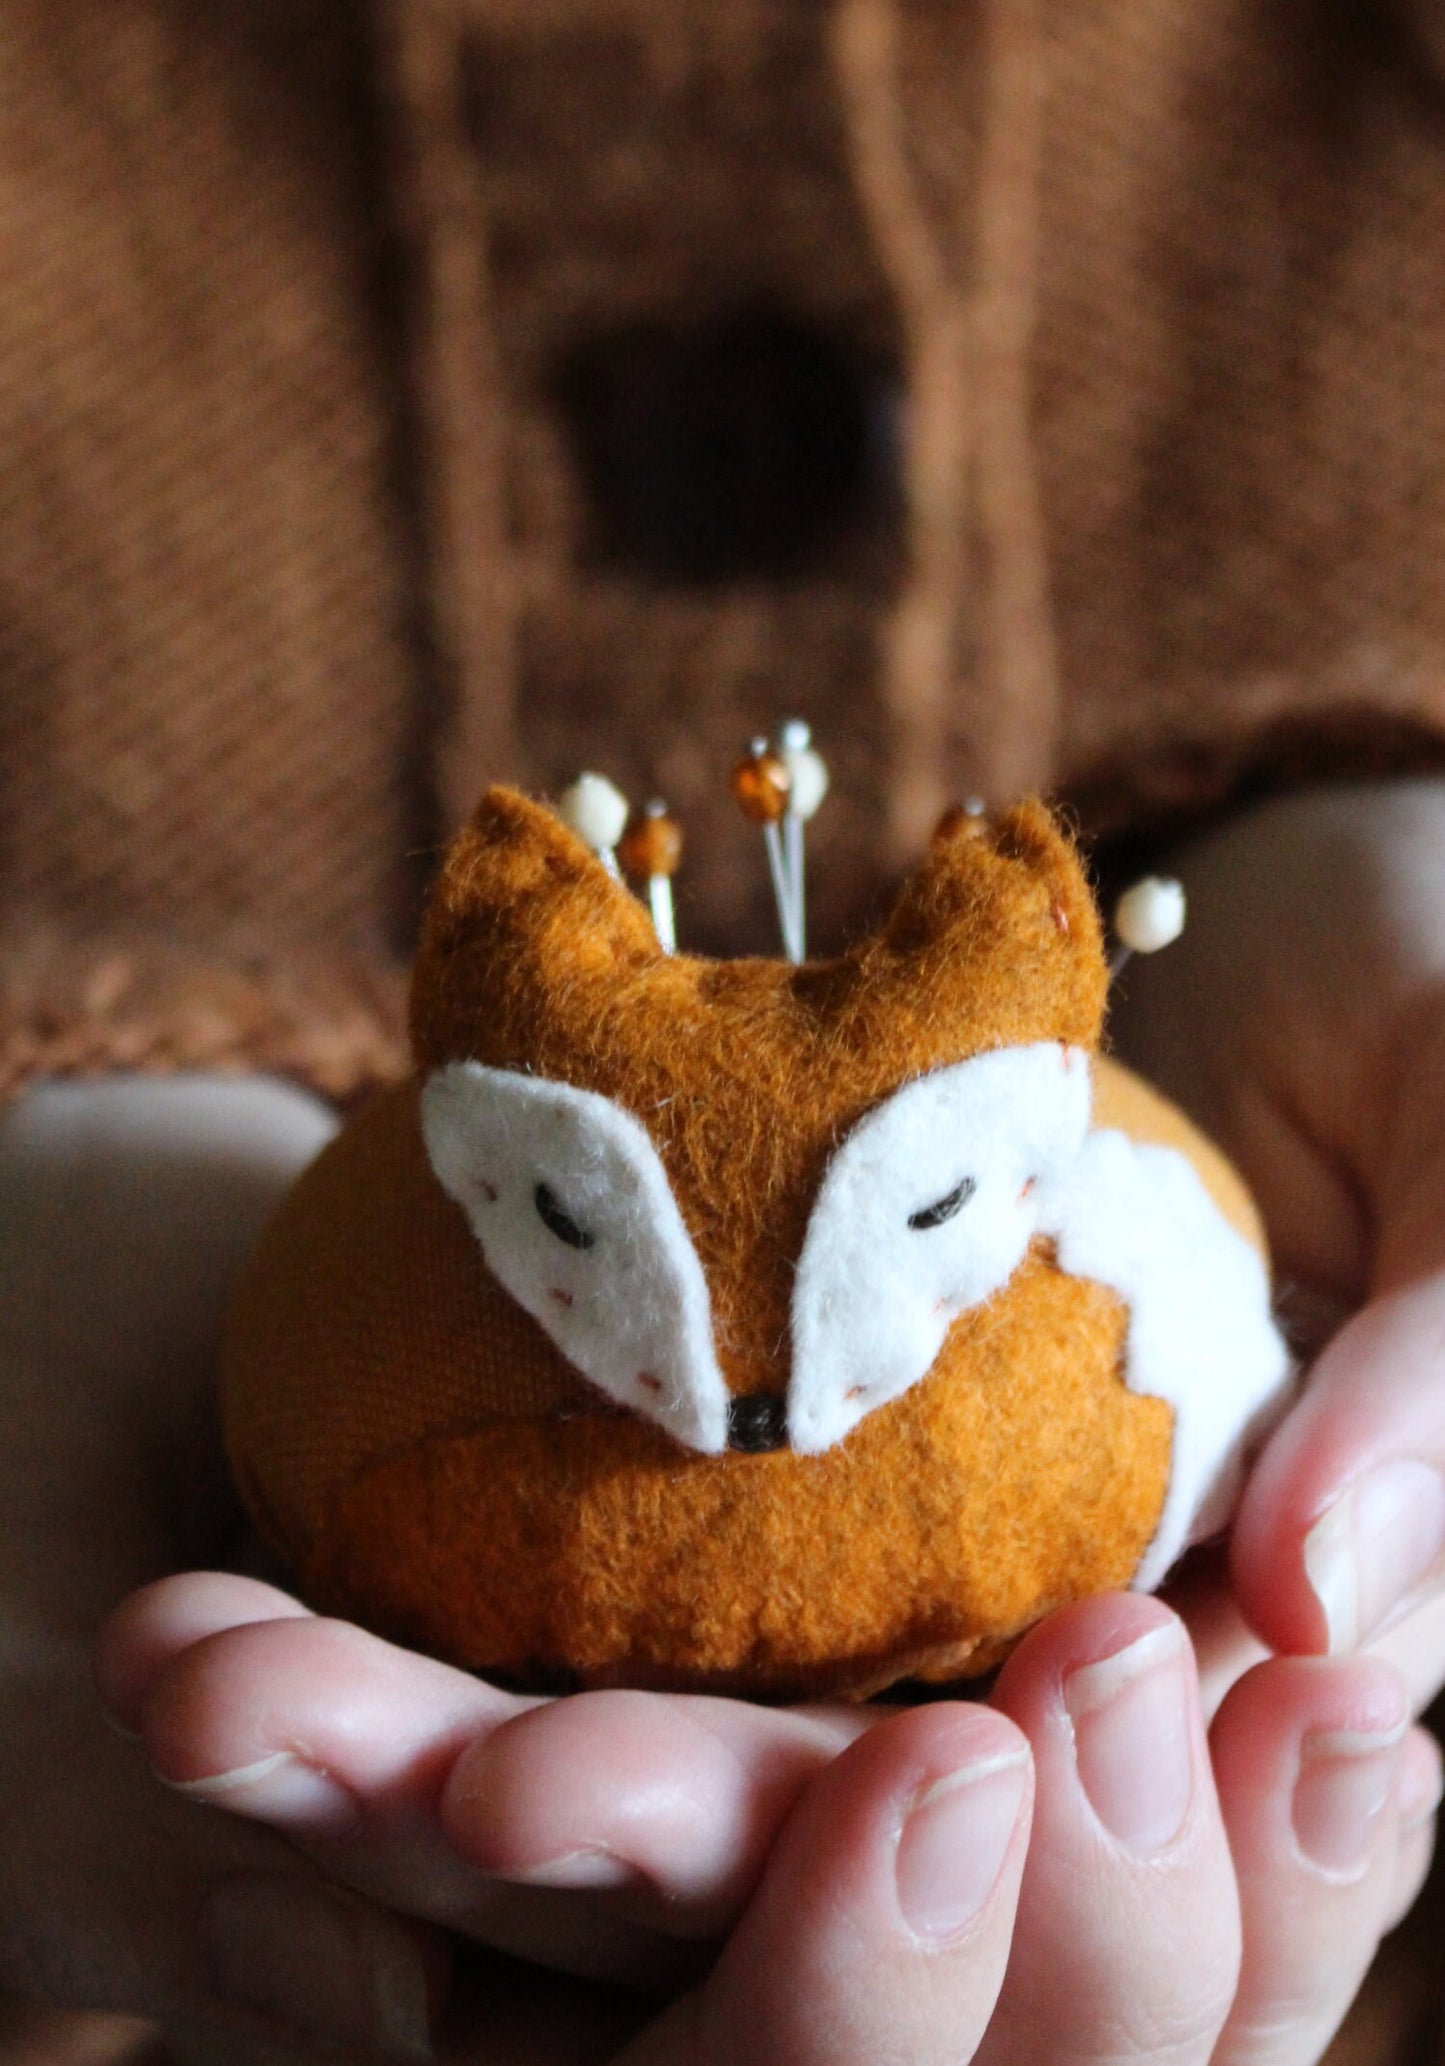 Easy Sewing Pattern • Sleepy Fox Pincushion print pattern • DIY Gift Idea // Gifts for Sewists